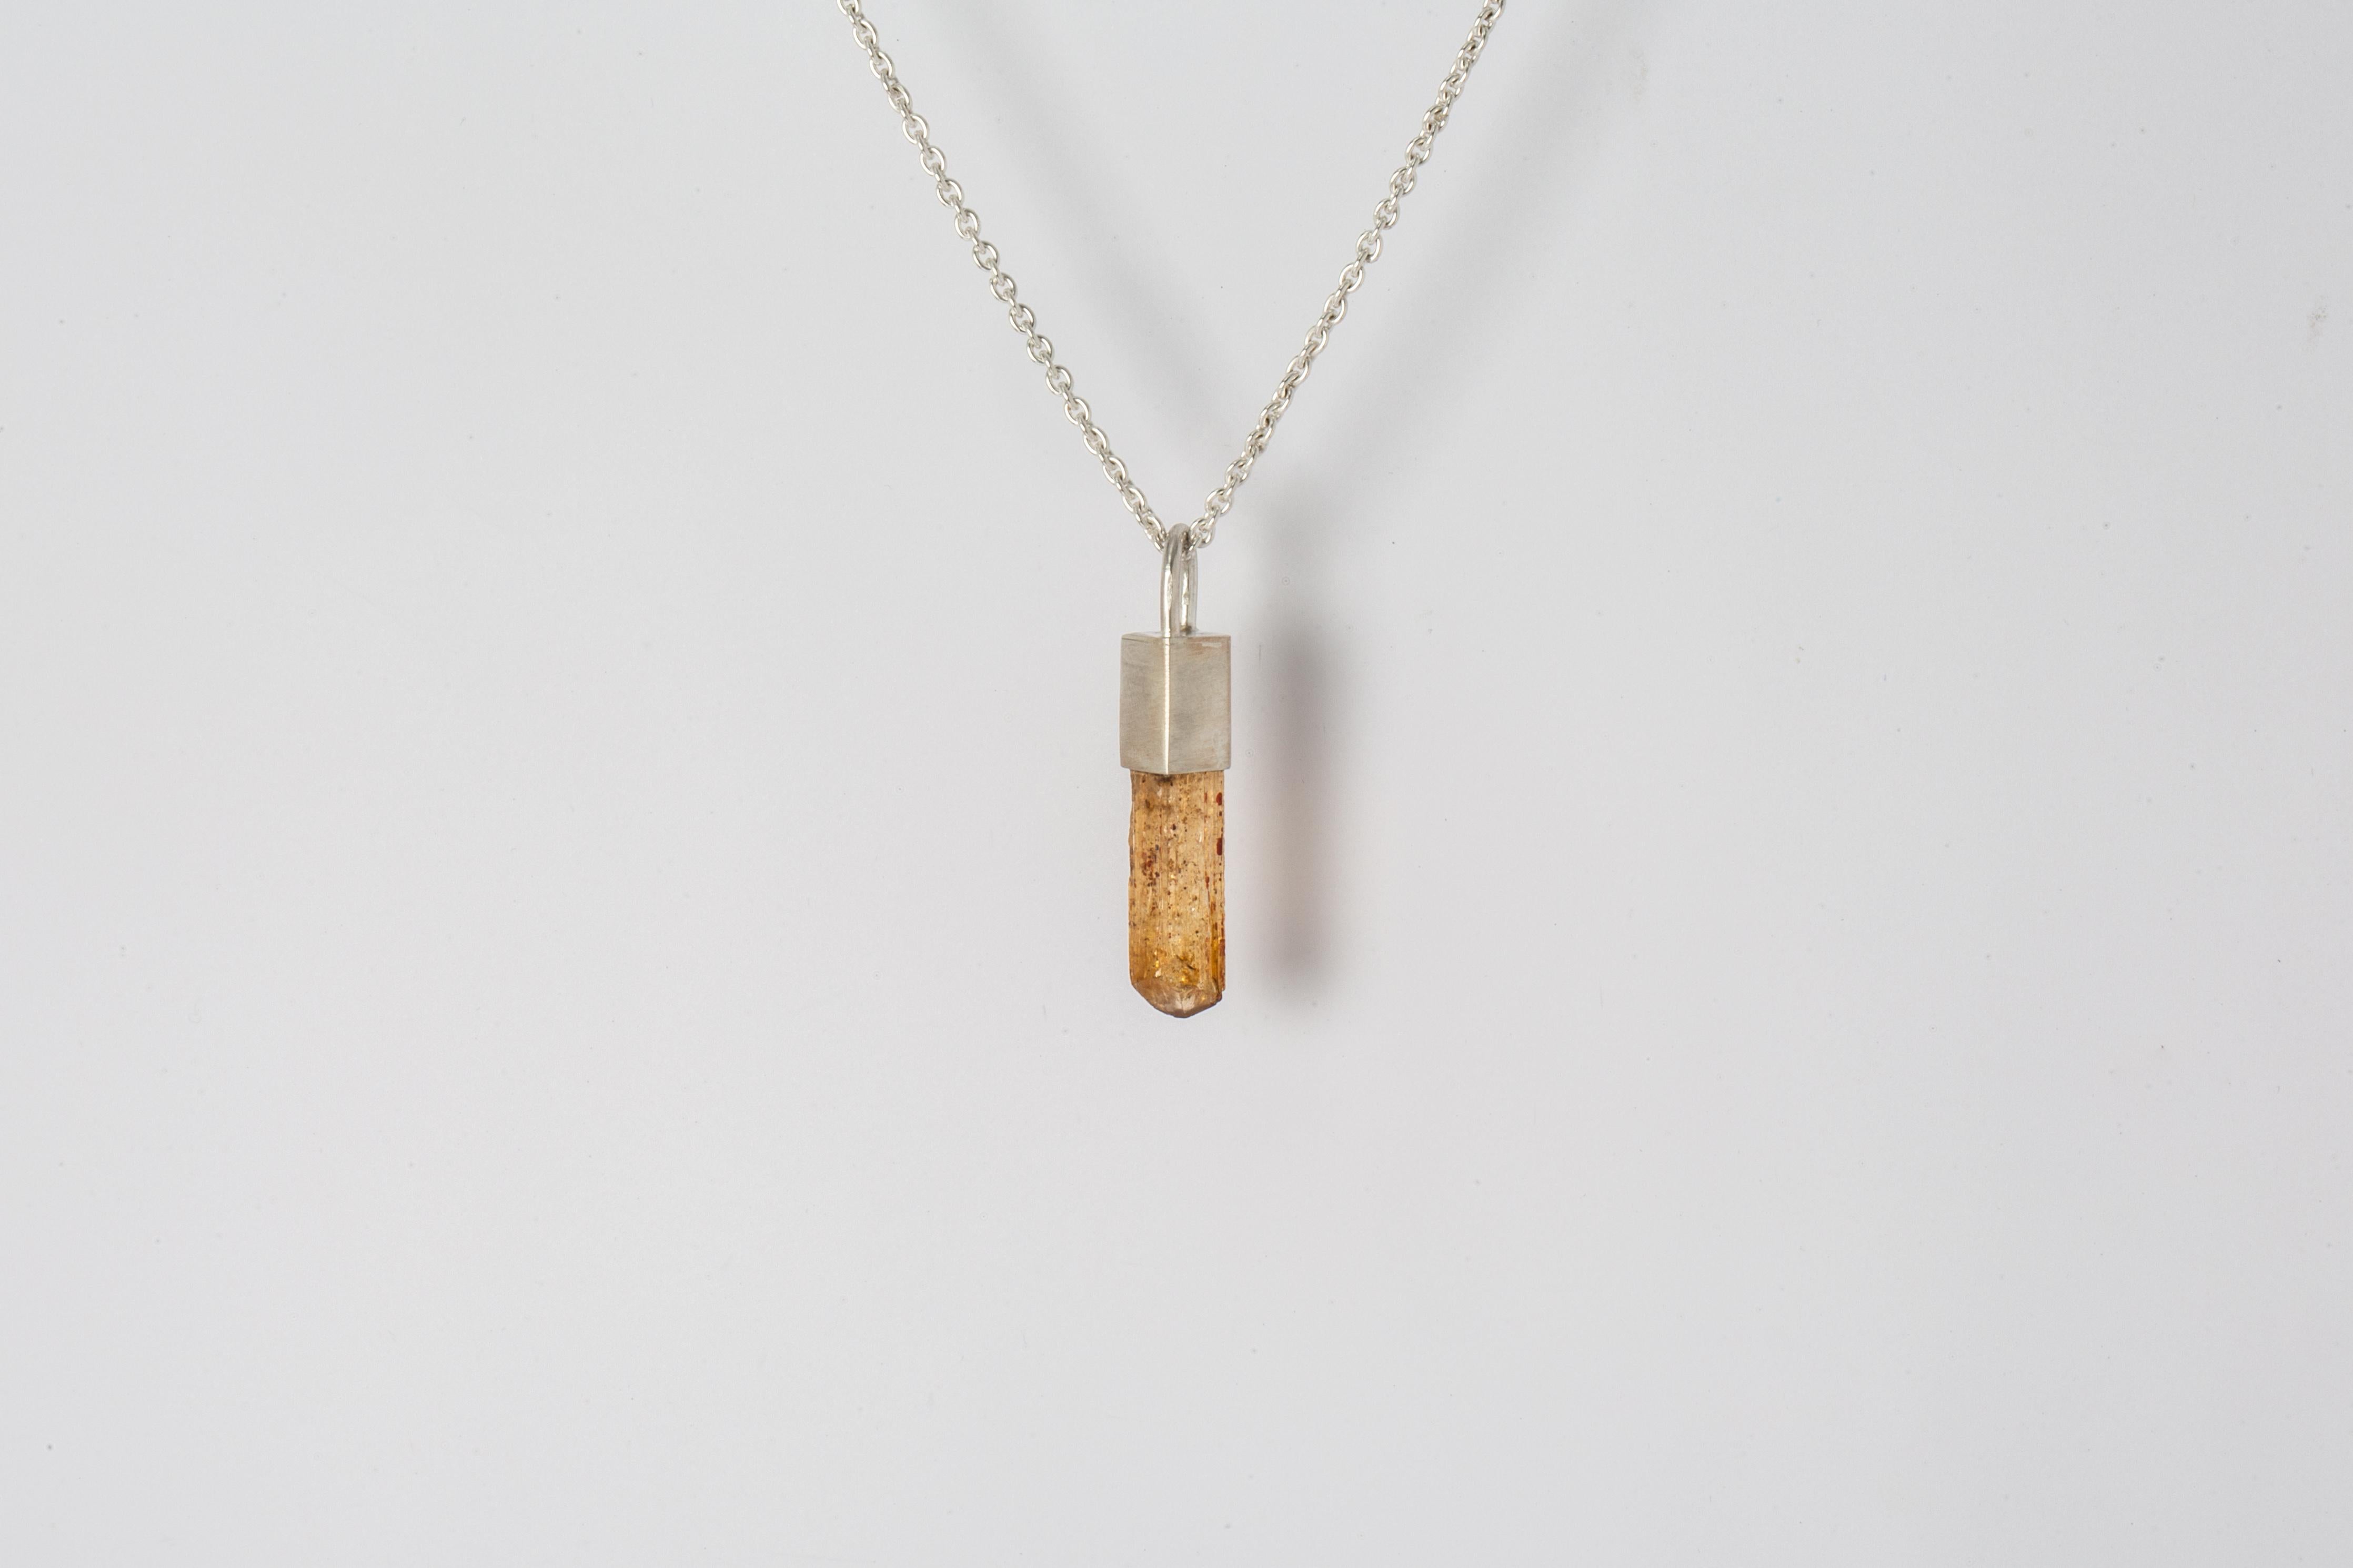 Talisman necklace in matte sterling silver and a rough of imperial topaz. The Talisman series is an exploration into the power of natural crystals. Each product with the status of Specimen has a unique number and is absolutely one-of-a-kind.